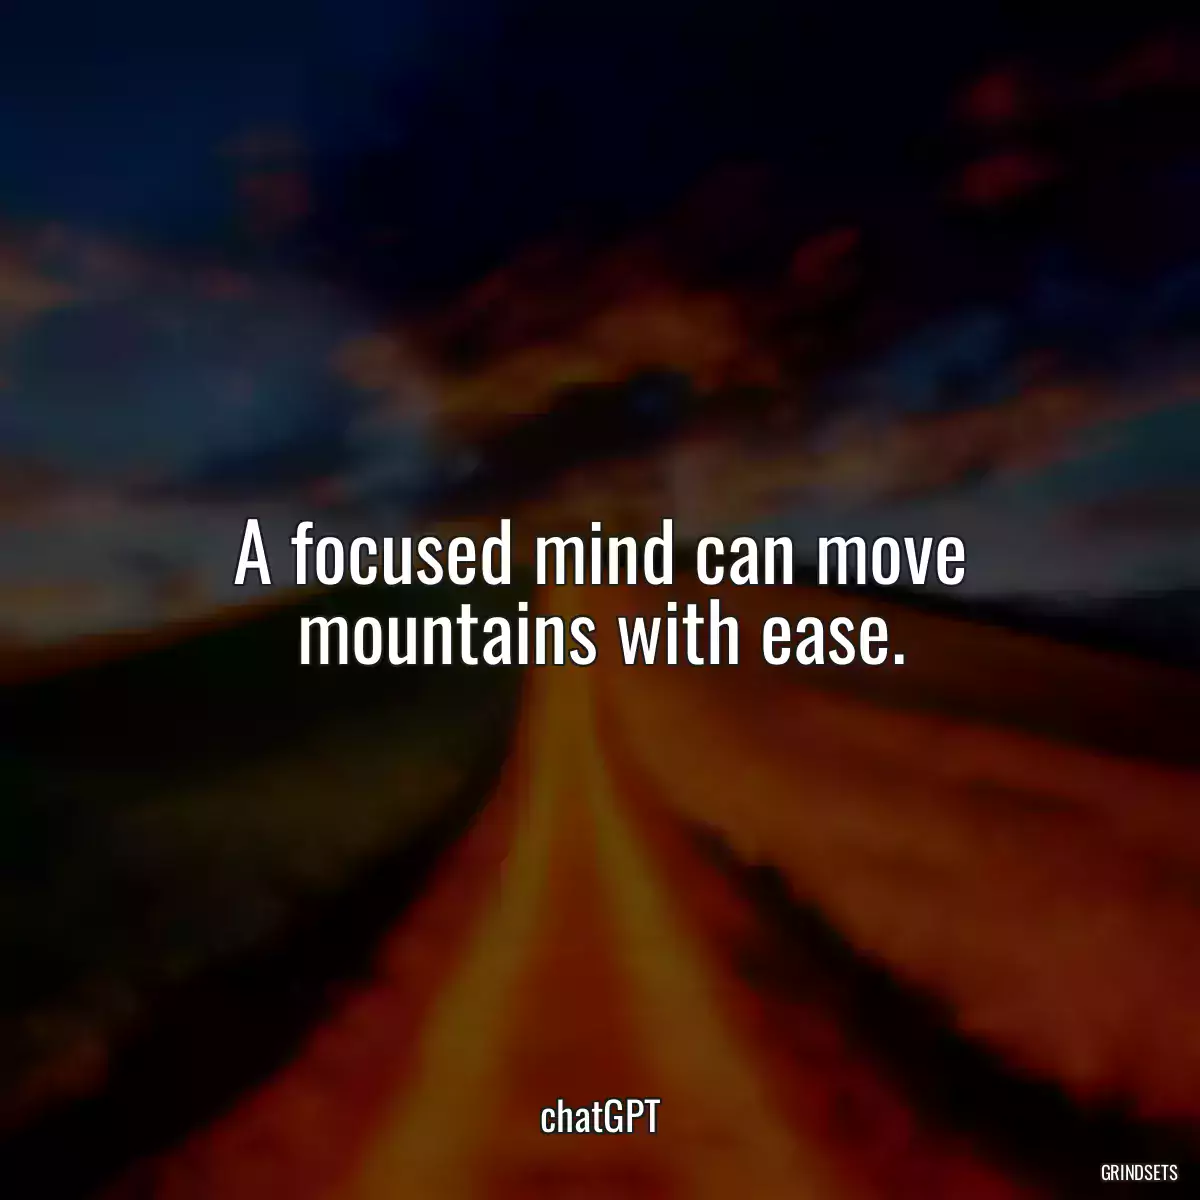 A focused mind can move mountains with ease.